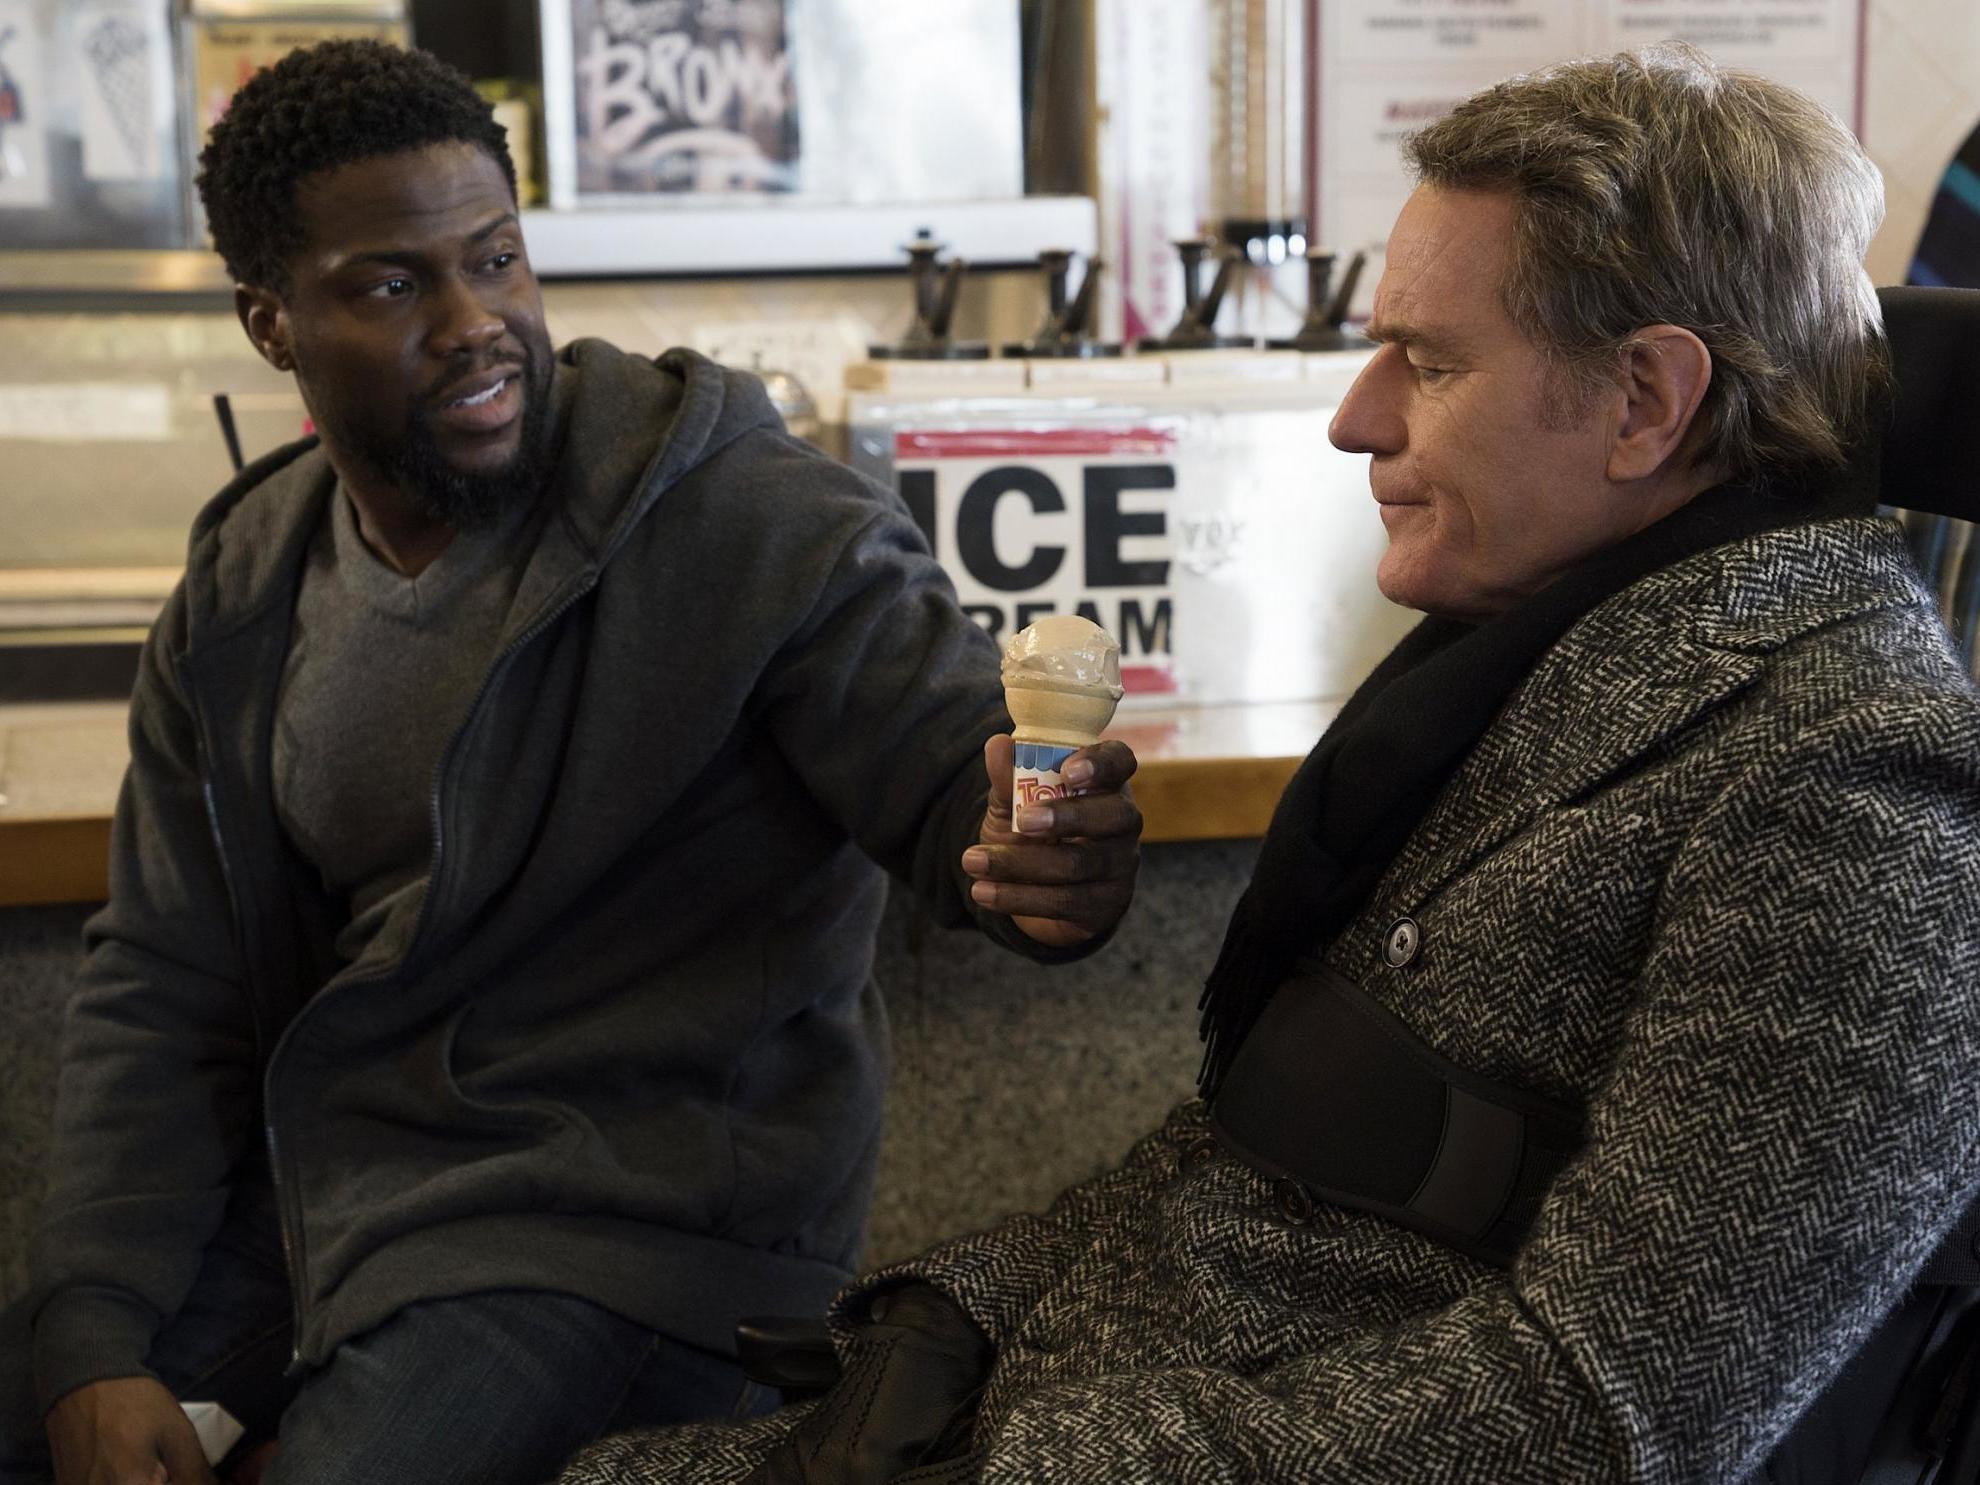 The Upside review: This Kevin Hart comedy is superficial in its treatment  of race, disability and class | The Independent | The Independent